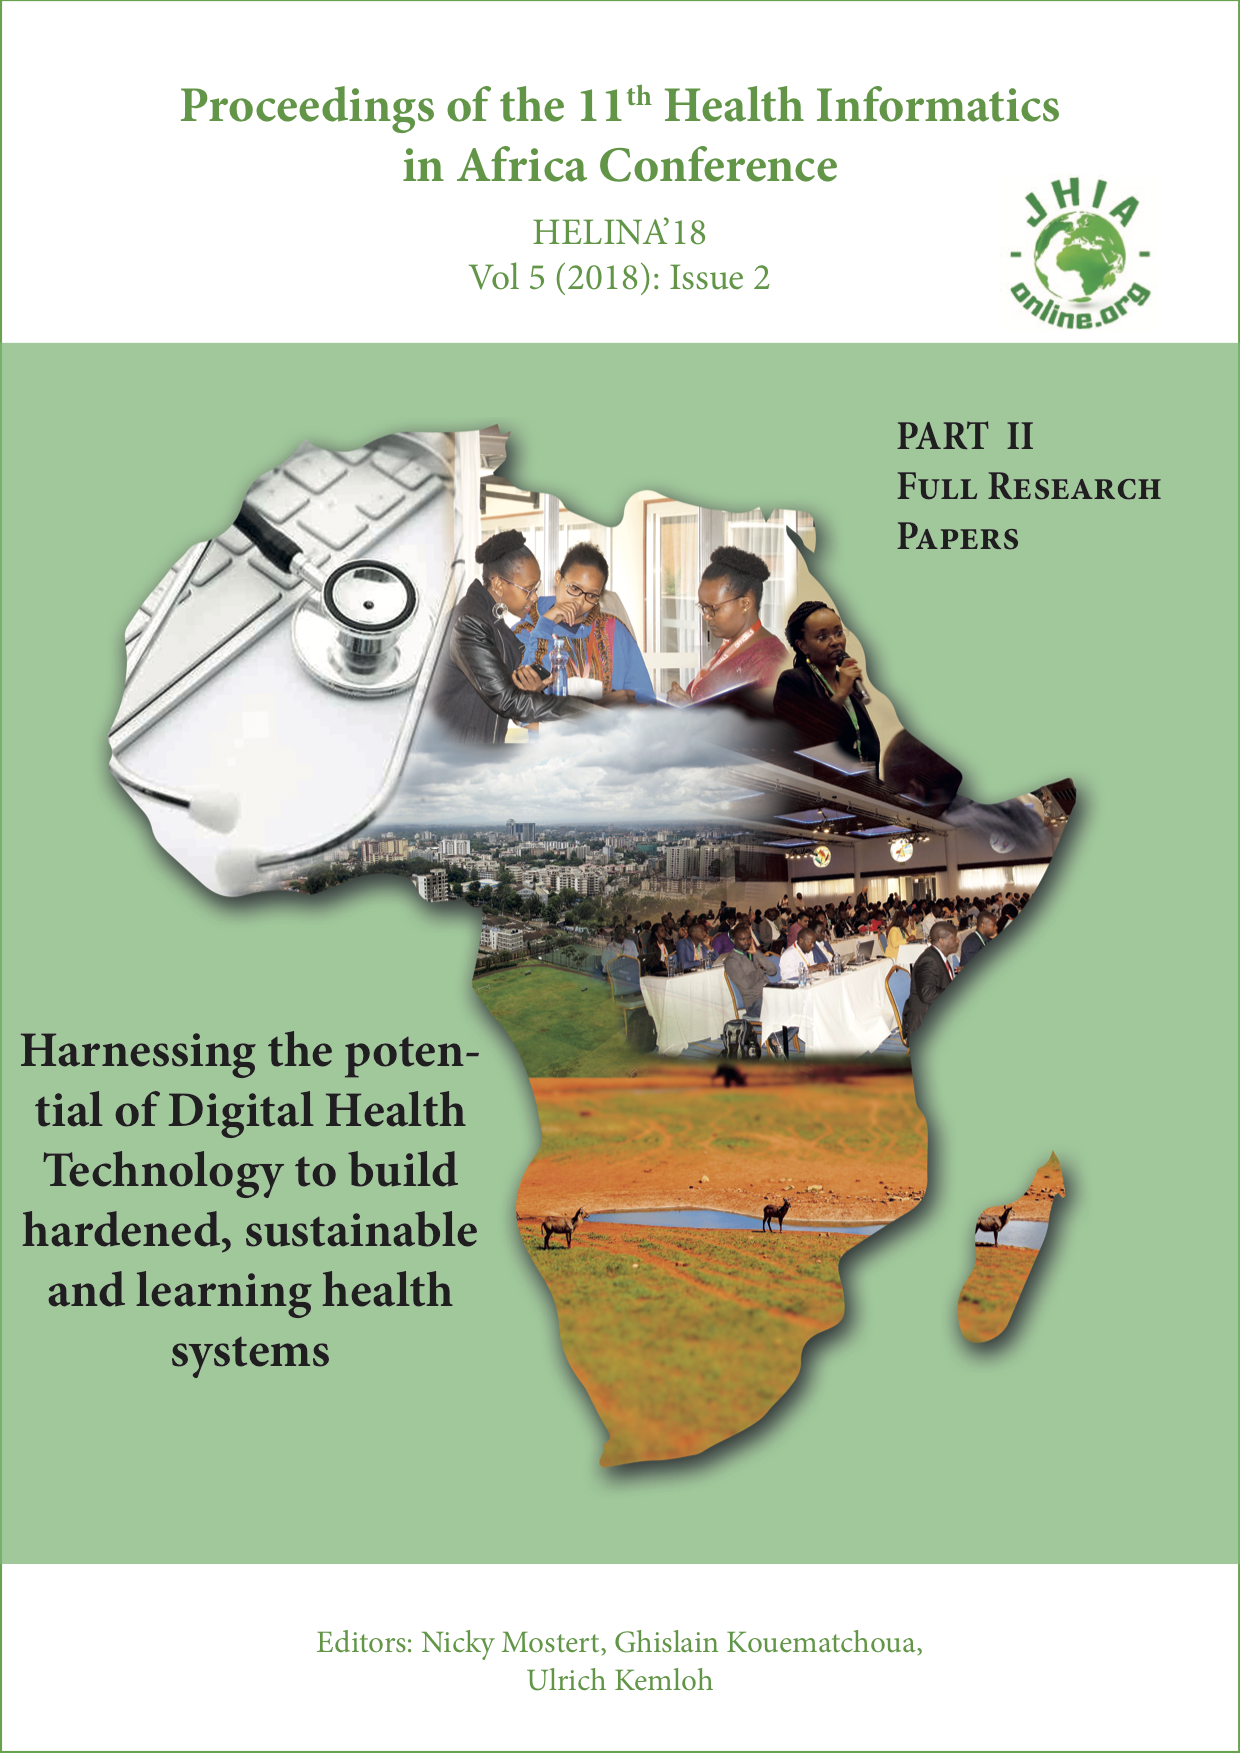 					View Vol. 5 No. 2 (2018): Special Issue "Harnessing the potential of Digital Health Technology to build hardened, sustainable and learning health systems"
				